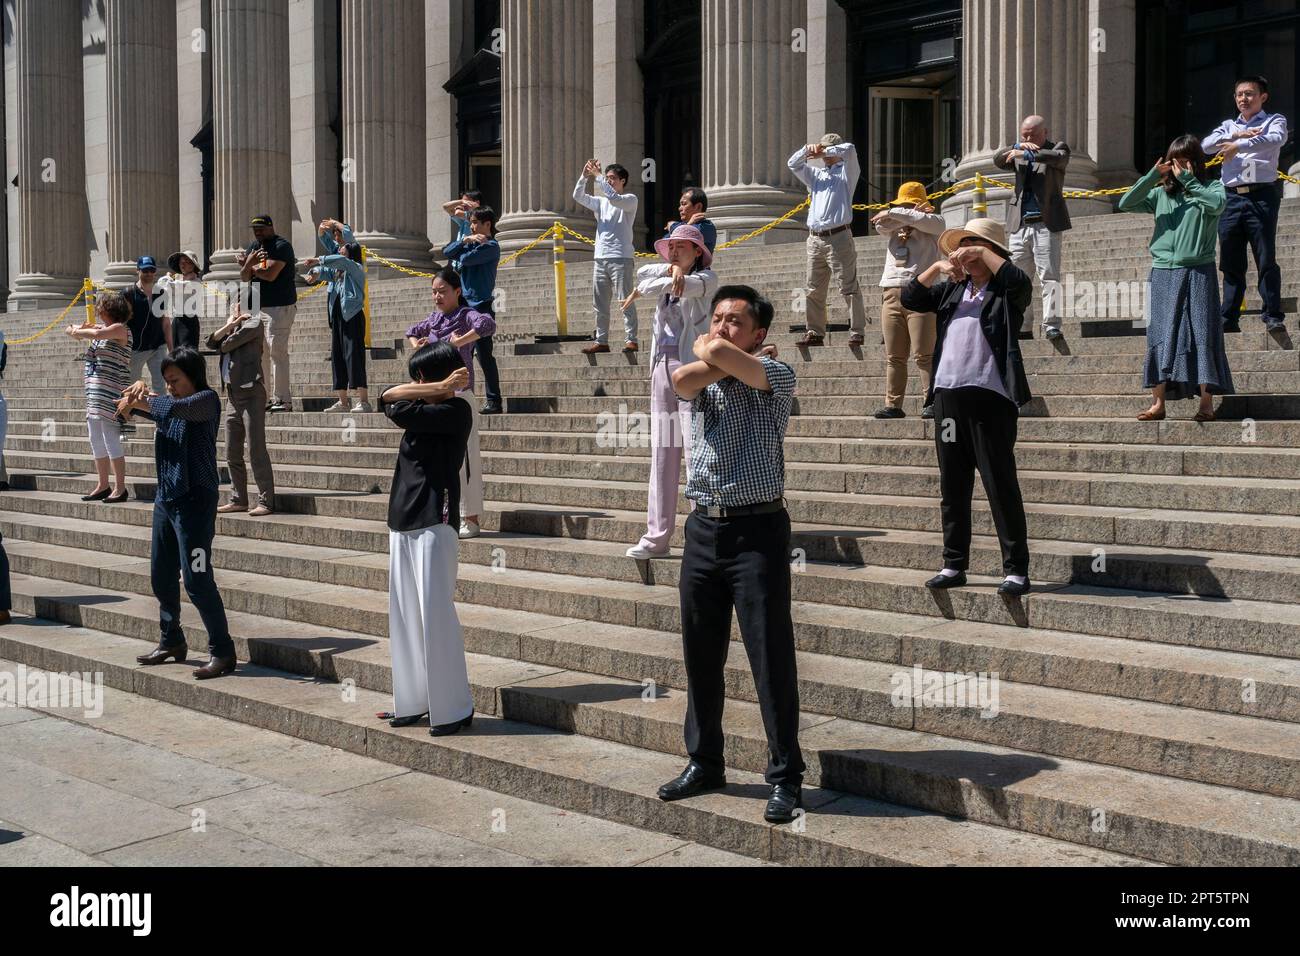 Members of Falun Dafa (Falun Gong)  practice Tai Chi in front of the James Farley Post Office in New York on Thursday, April 13, 2023.  Practitioners of Falun Dafa claim that they are being persecuted by the government in China for their spiritual beliefs. (© Richard B. Levine) Stock Photo